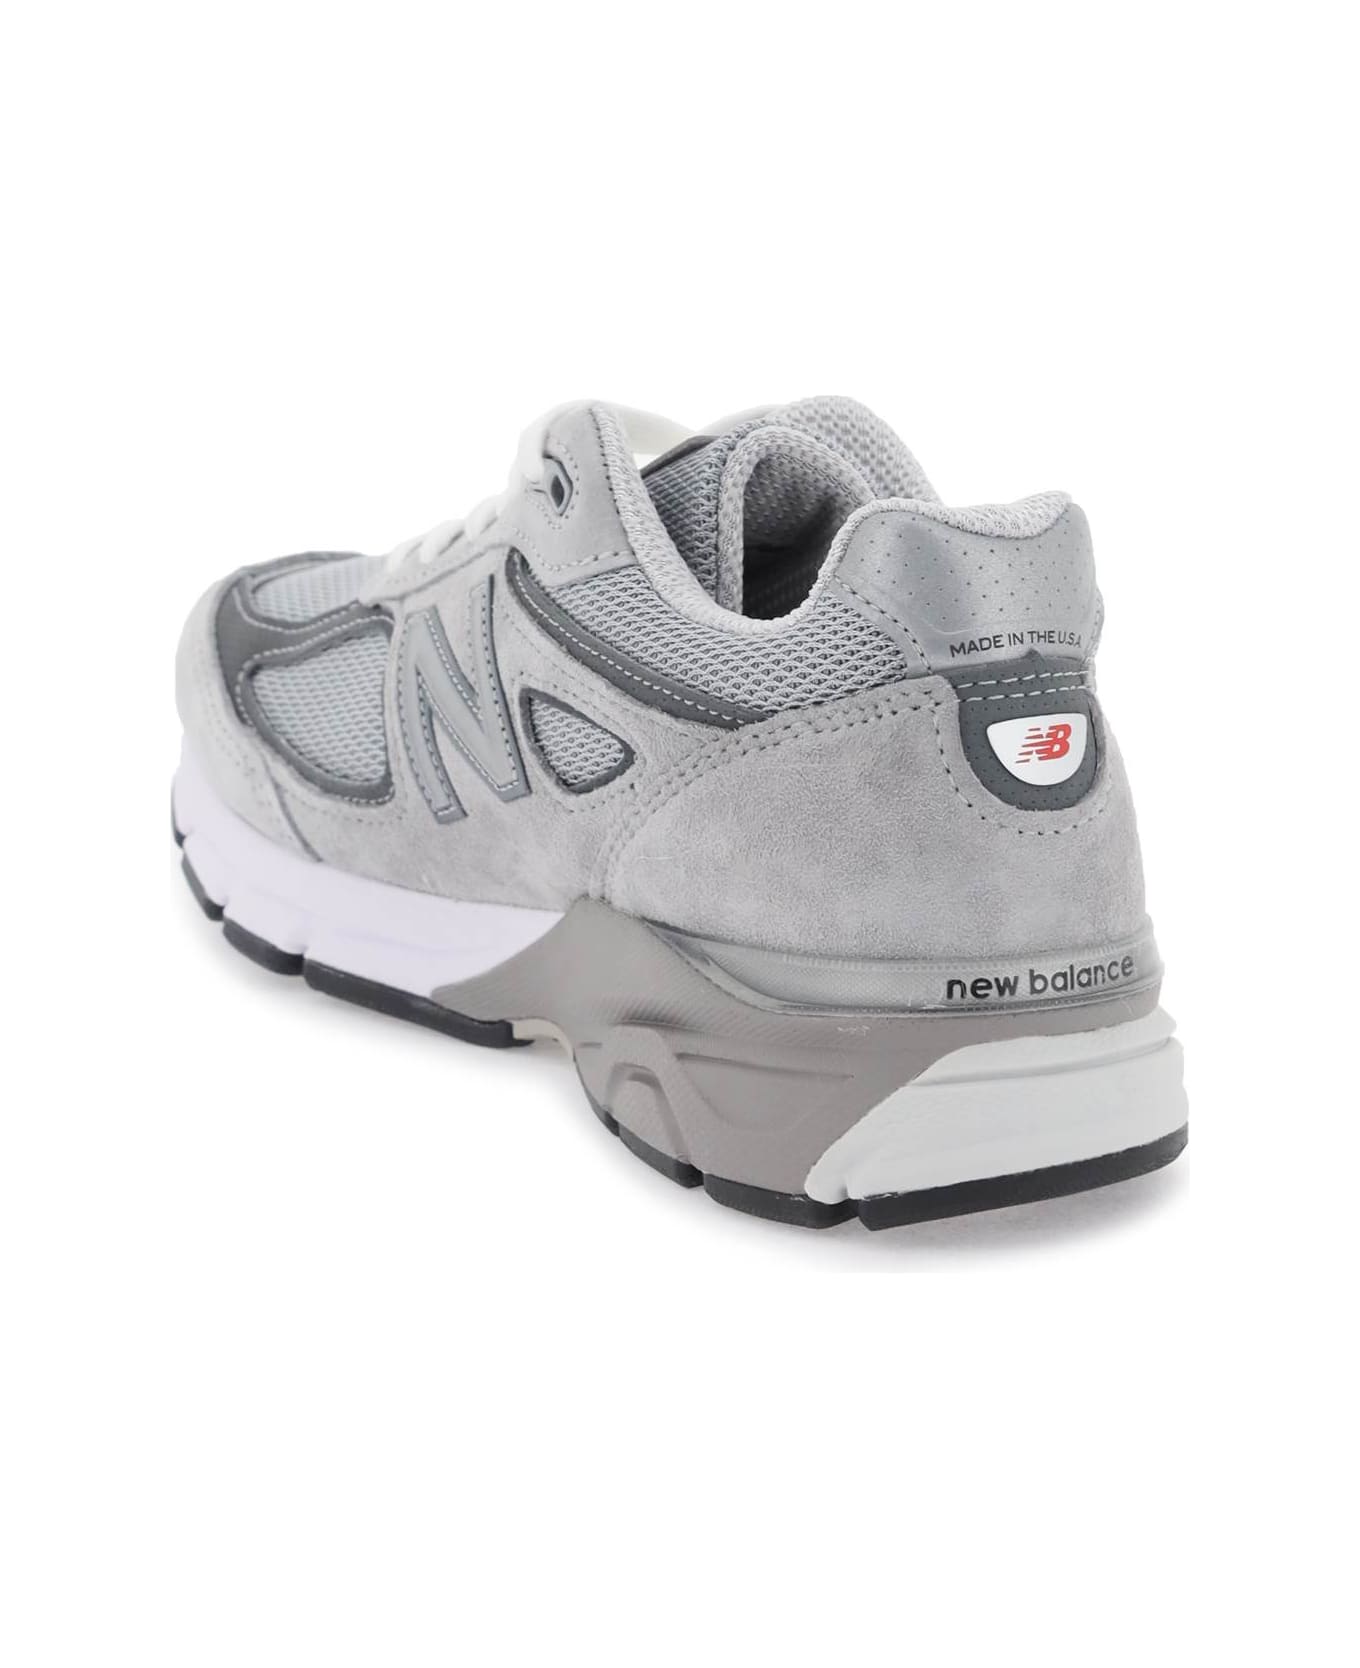 New Balance Sneakers 'made In Usa 990v4' - Grey